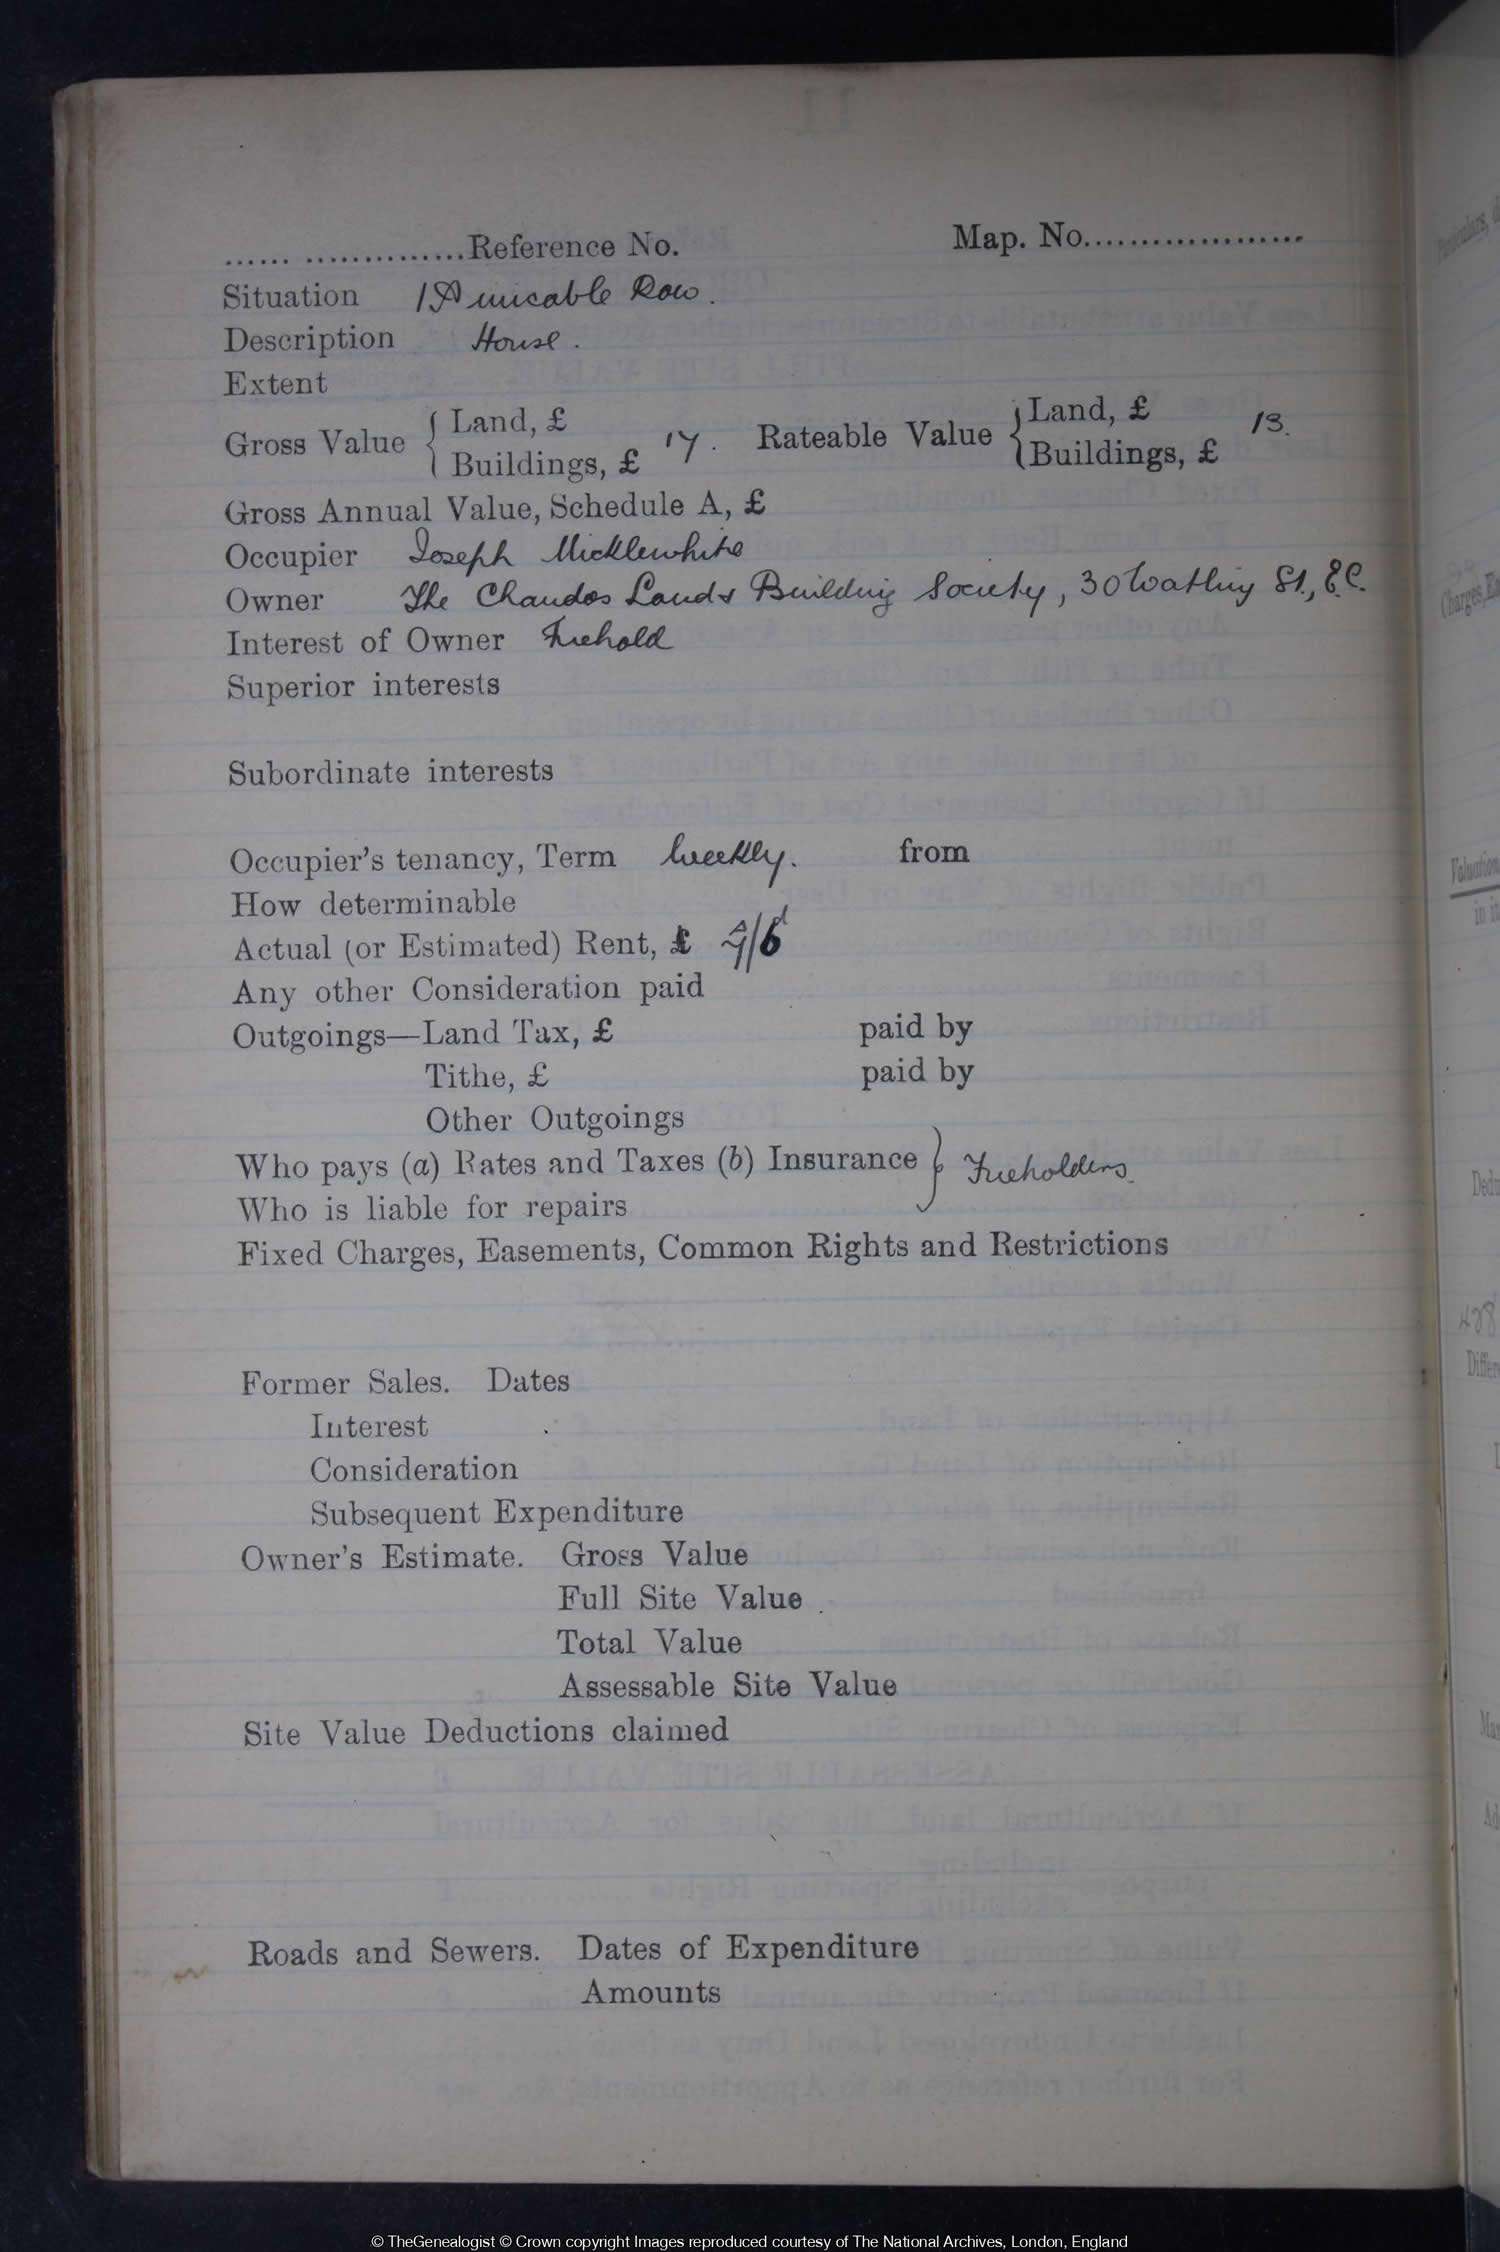 Lloyd George Domesday Survey Field Book entry for 1 Amicable Row, Southwark